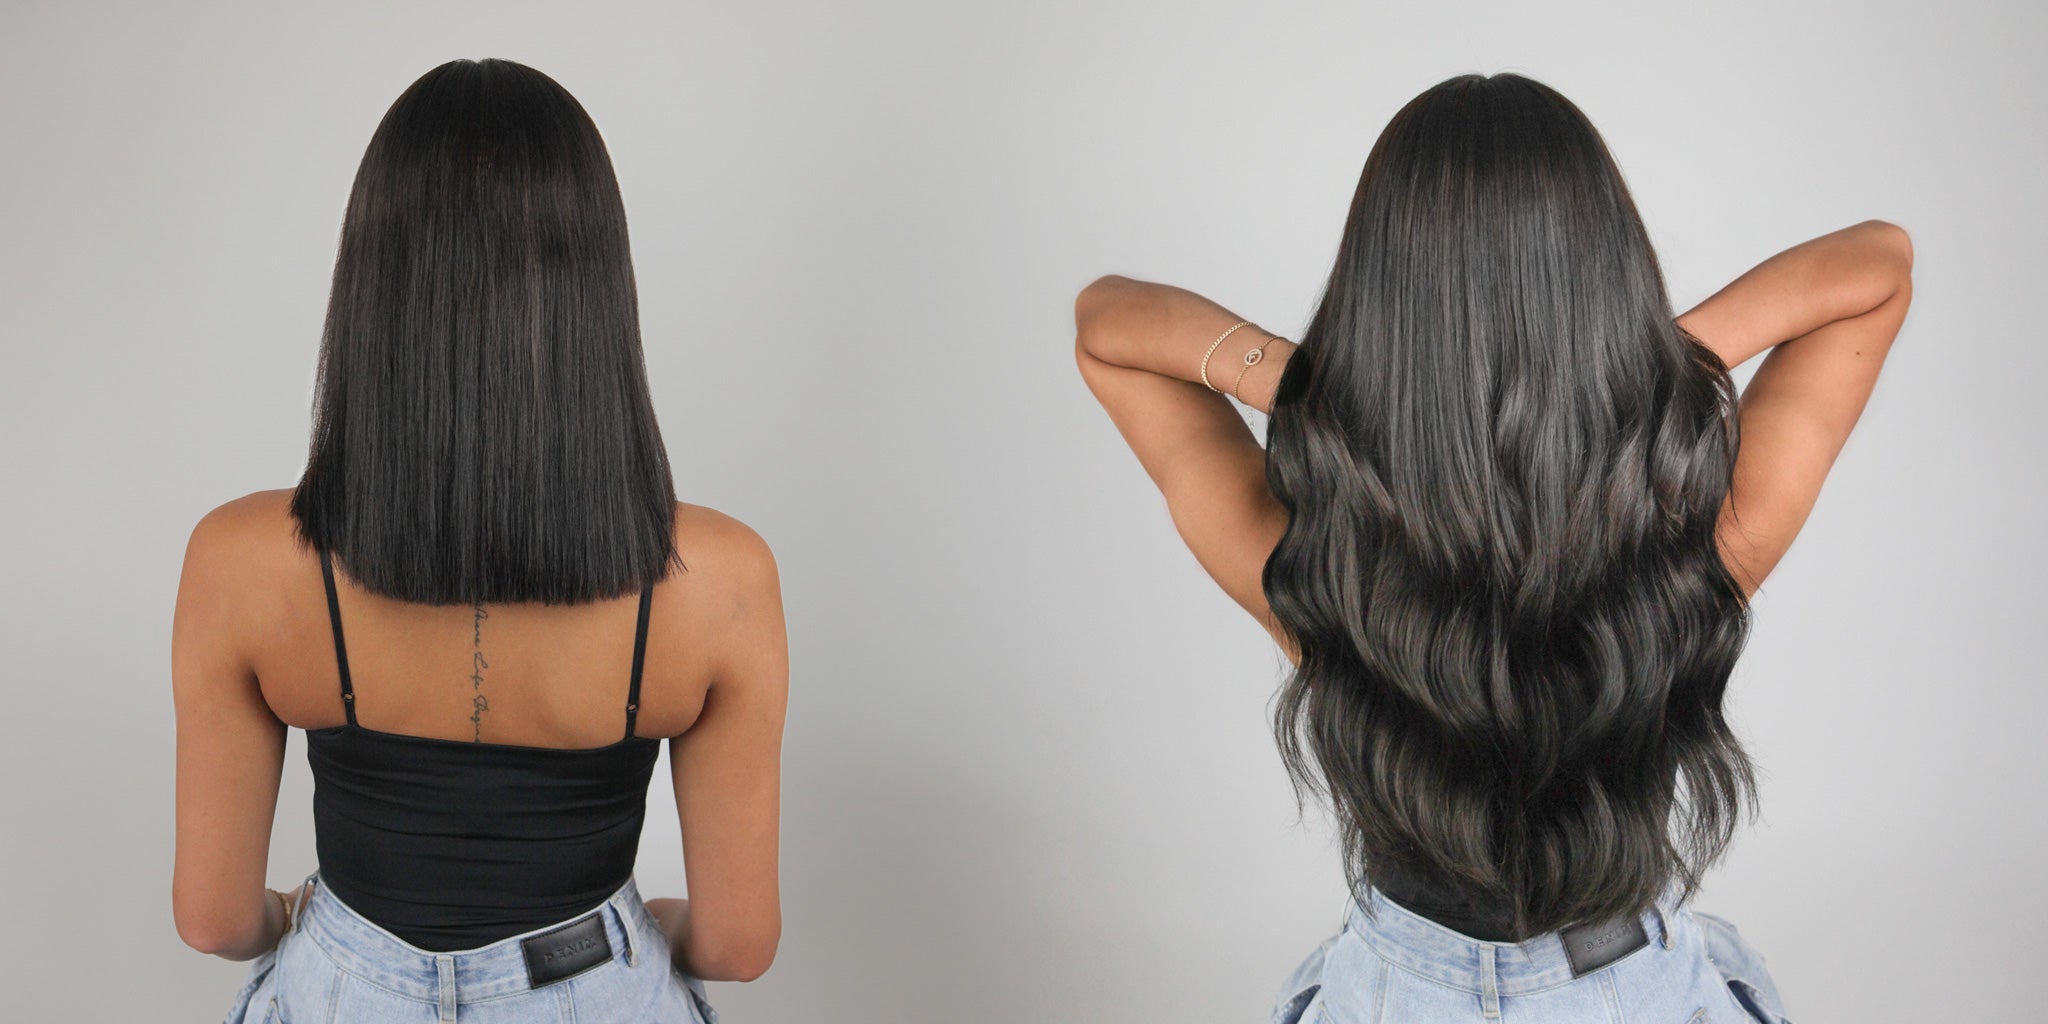 Tape Hair Extensions Before and After